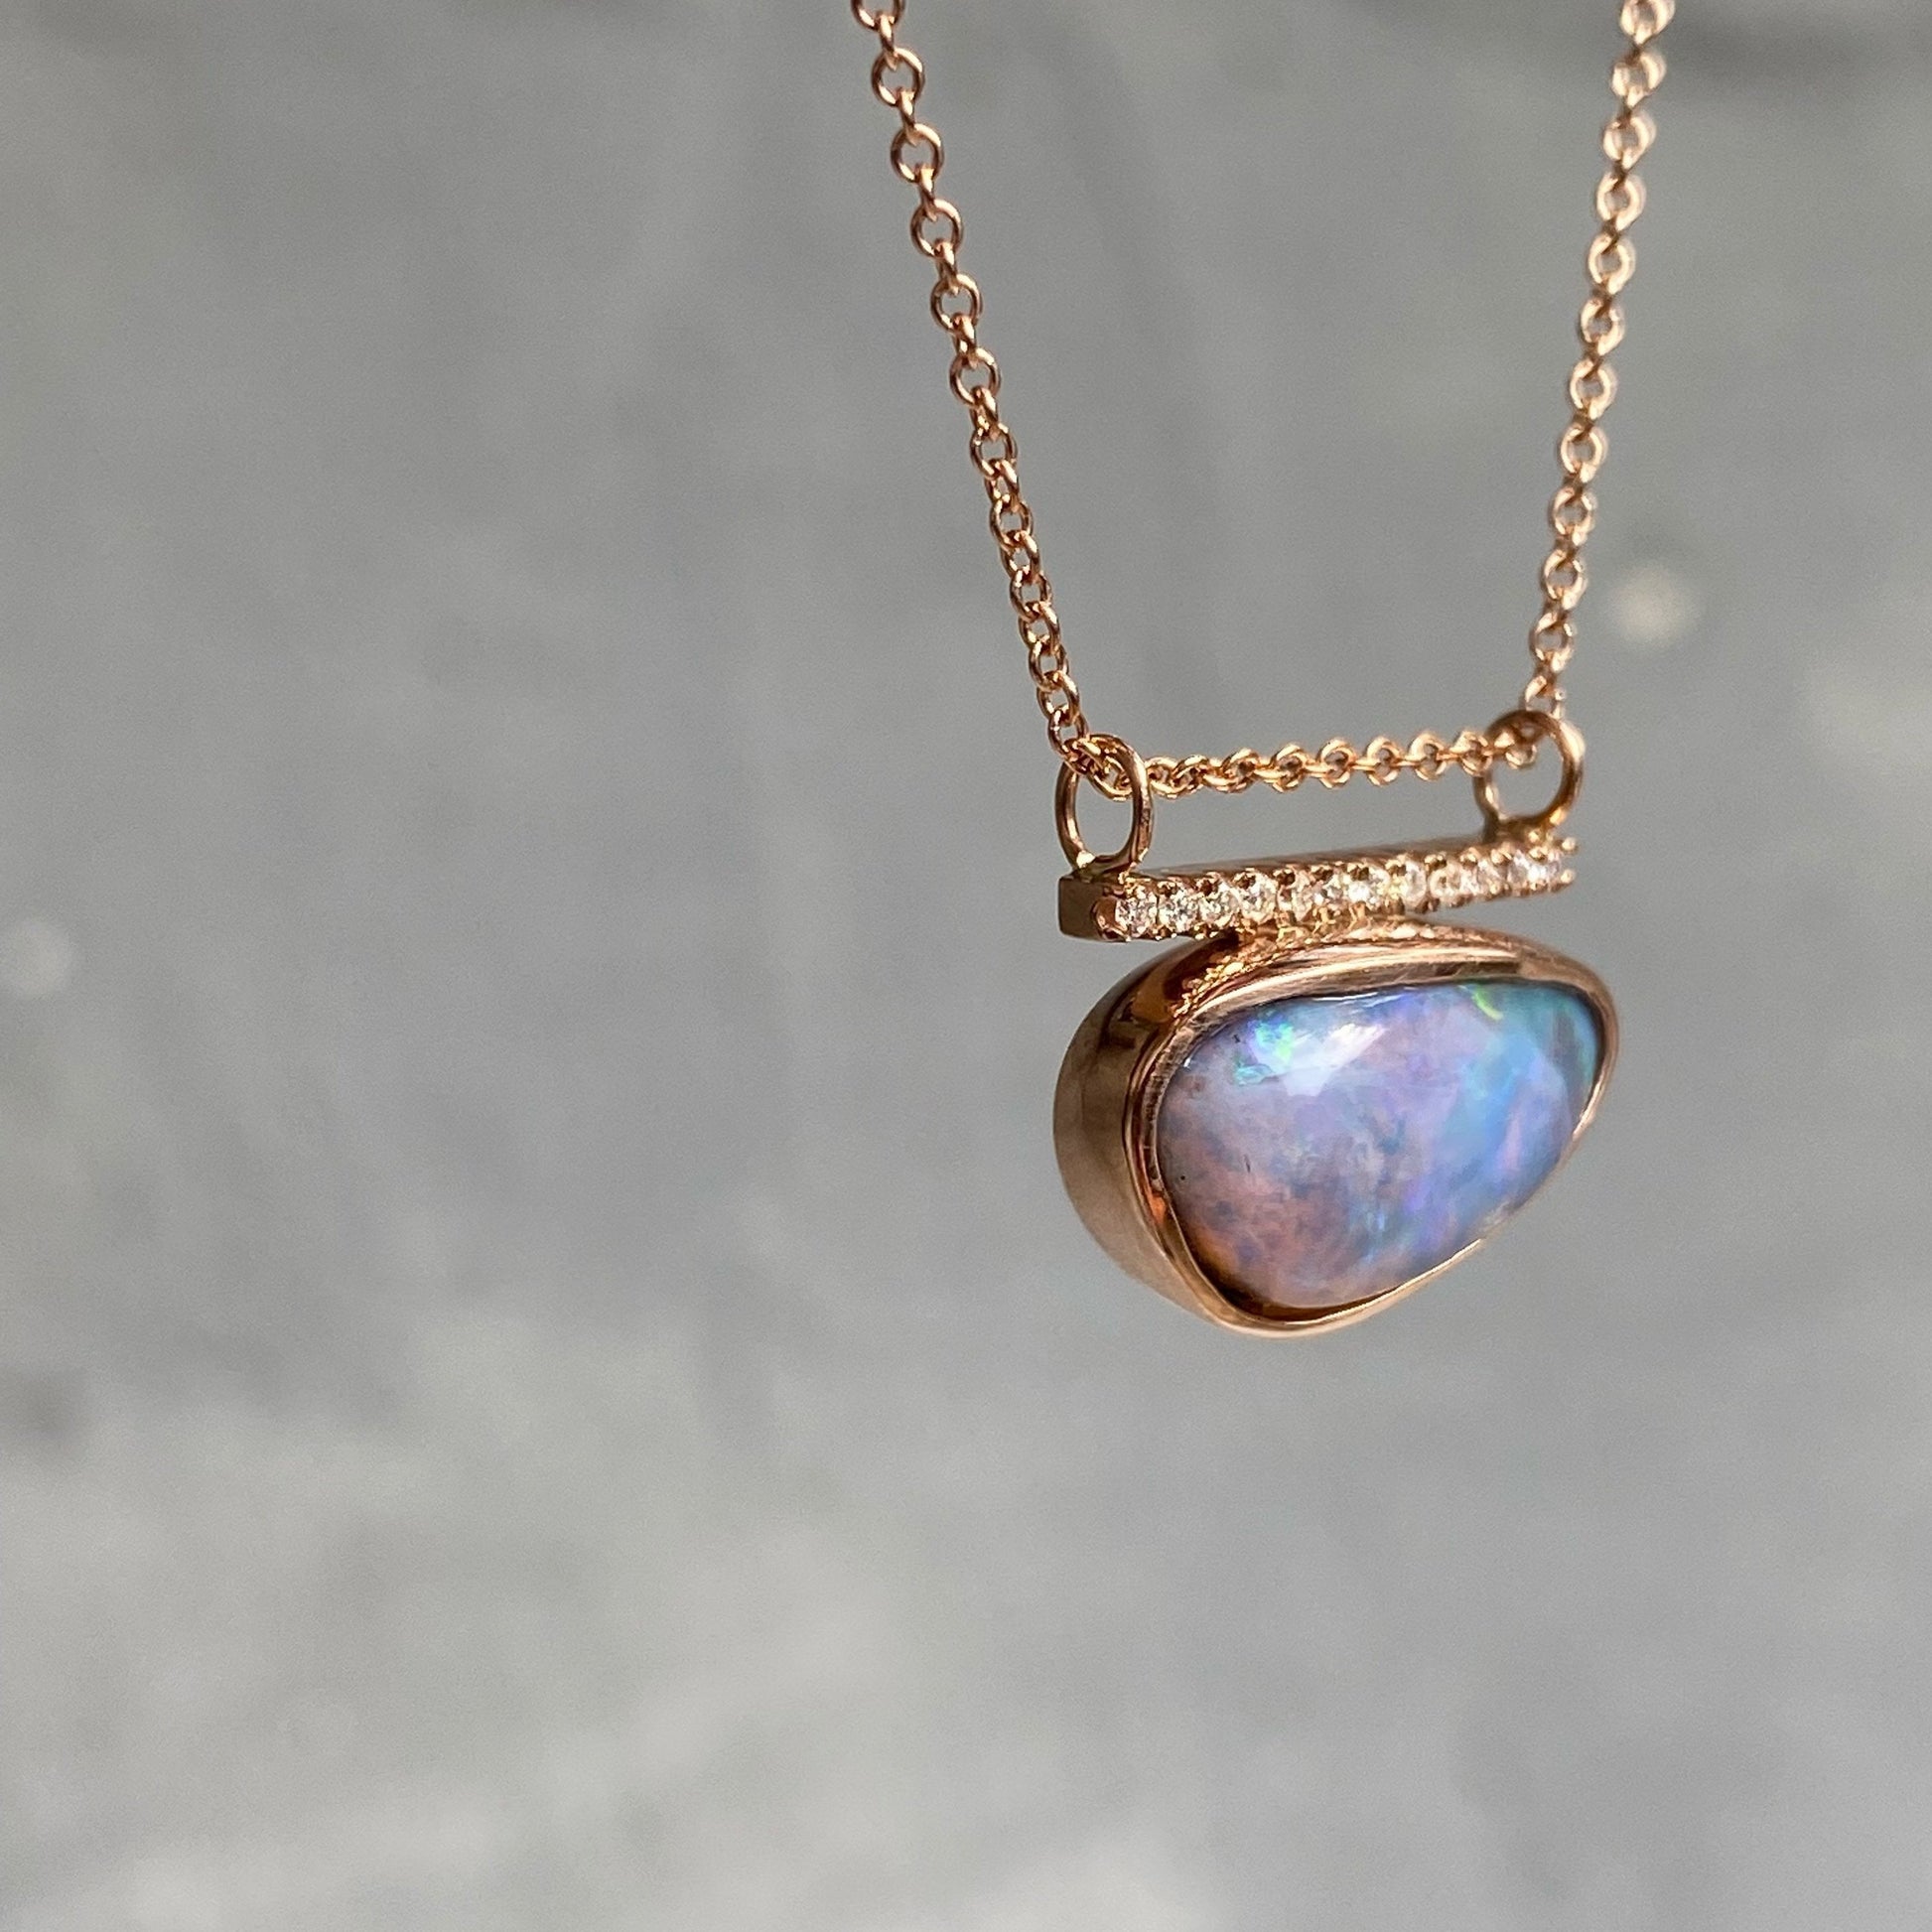 Angle shot of purple opal pendant necklace by NIXIN Jewelry